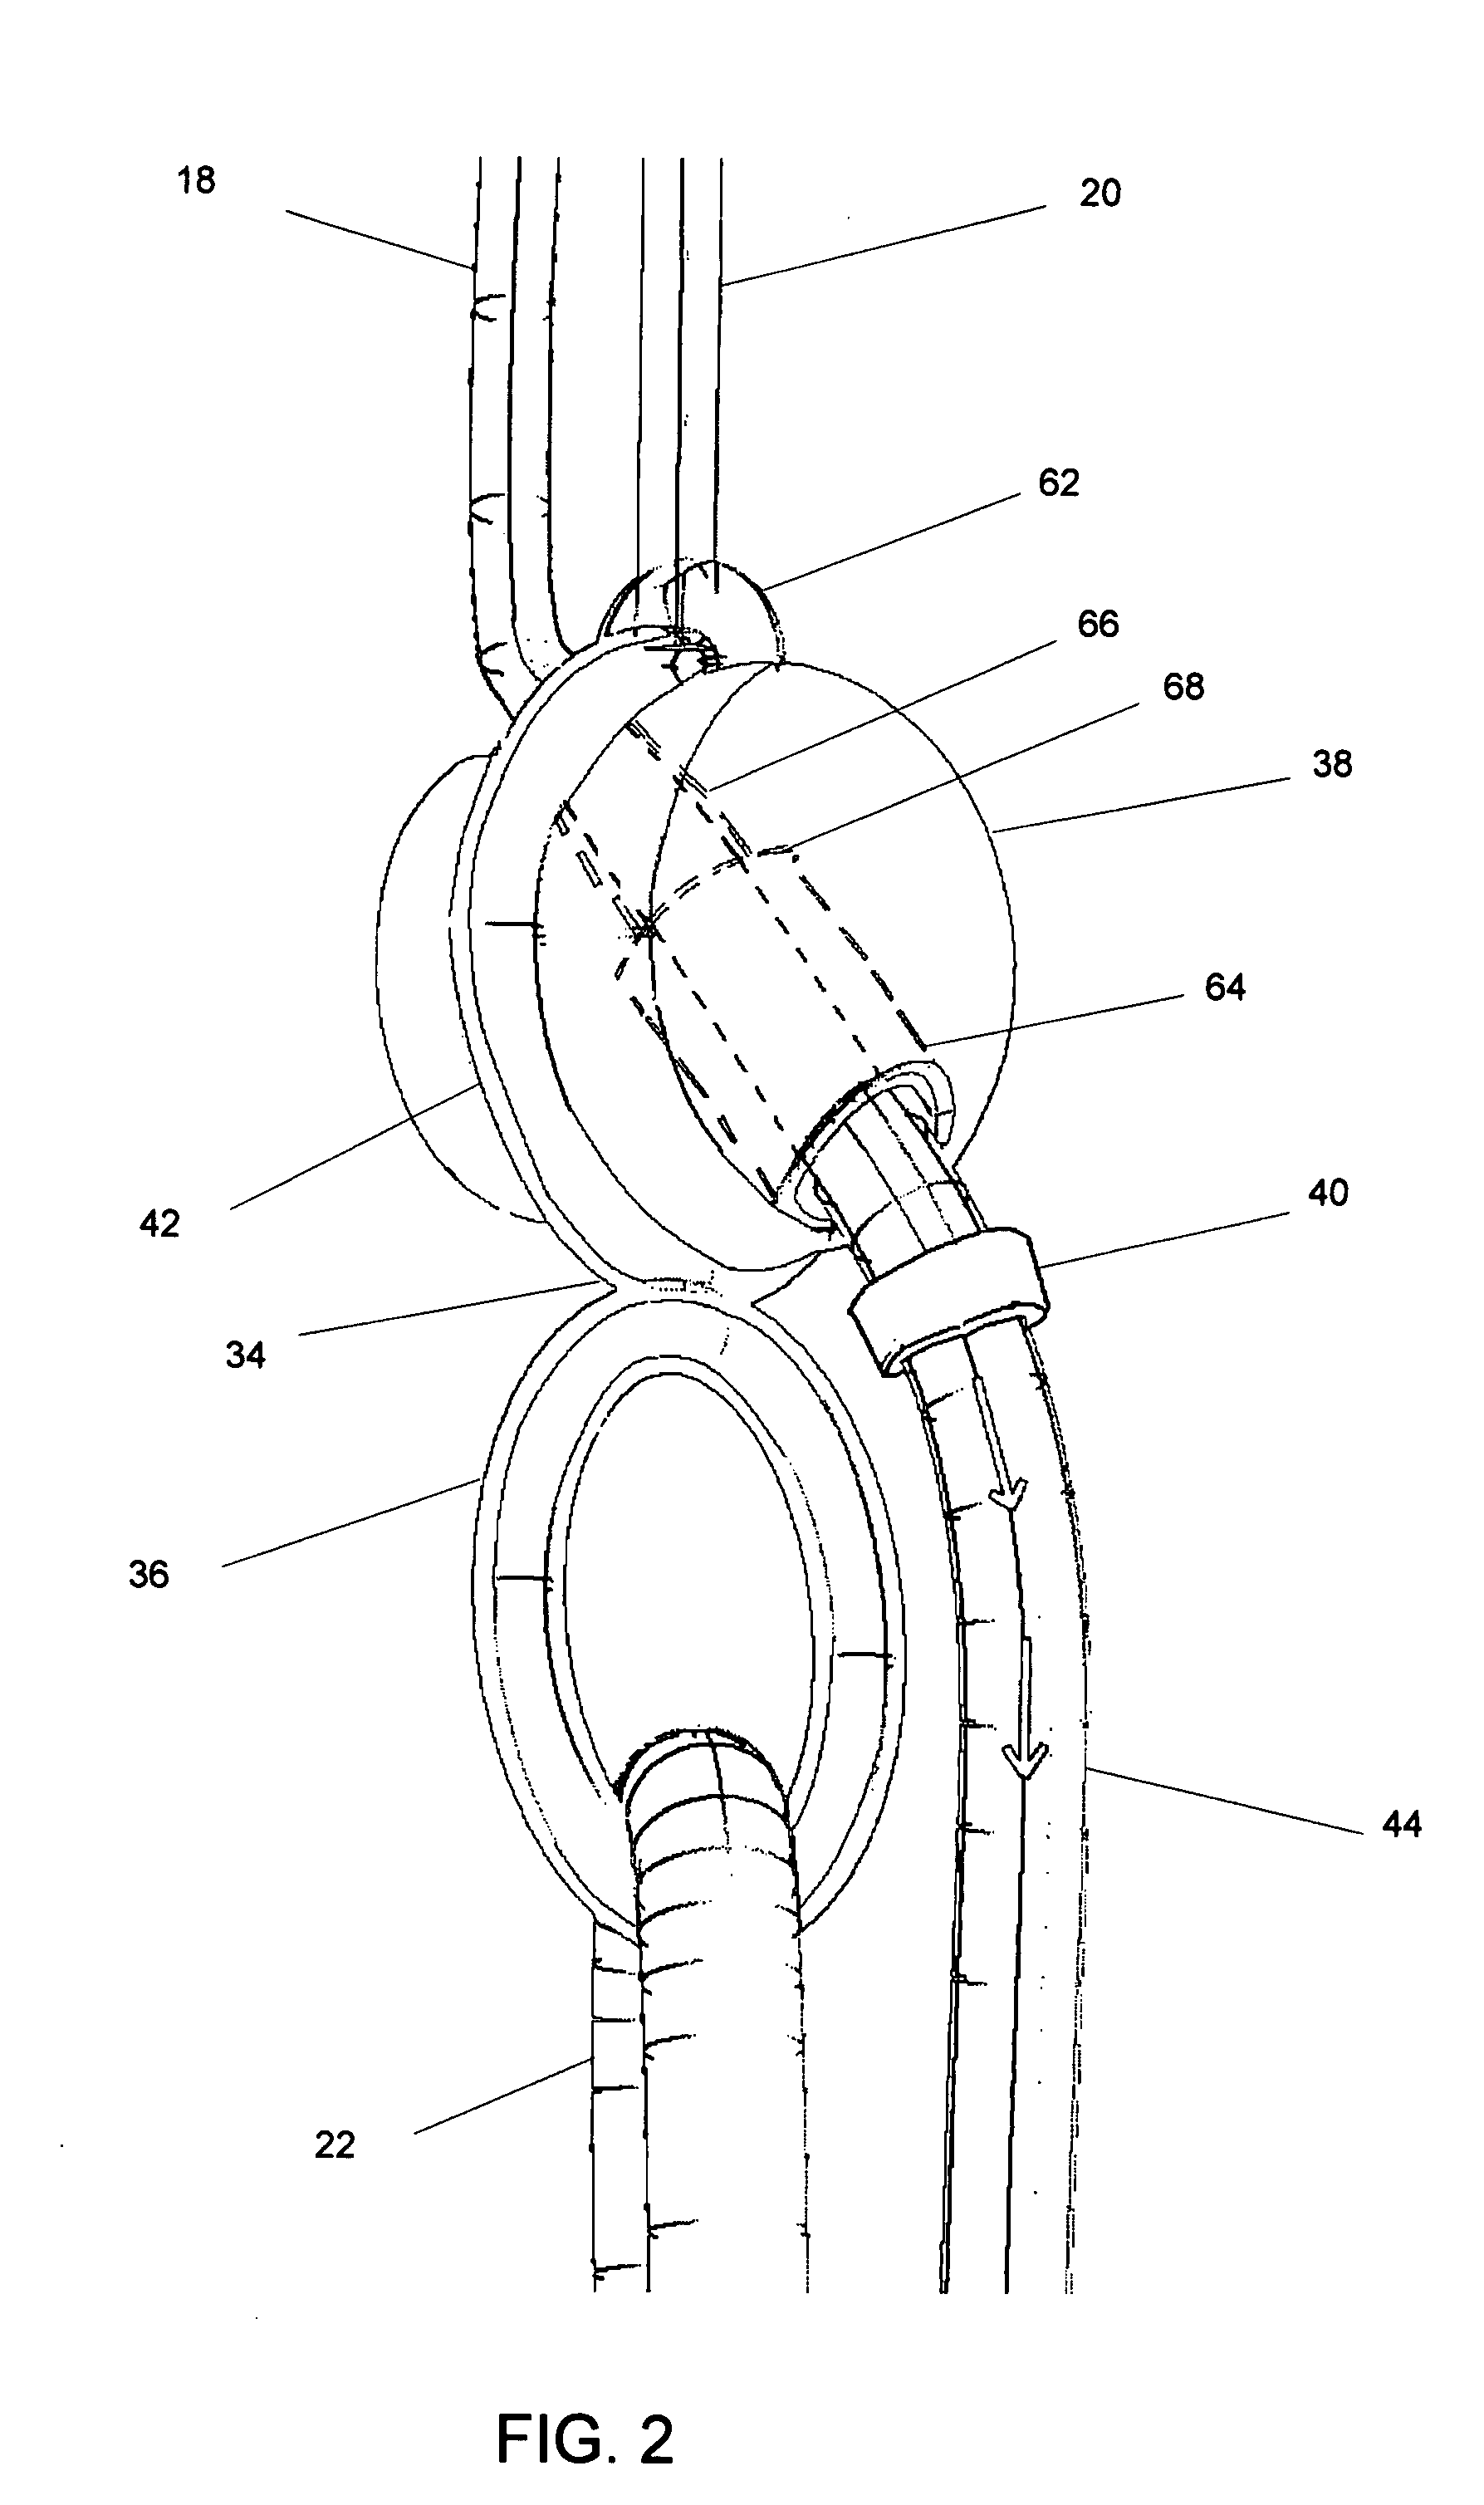 Center-routed kite safety device